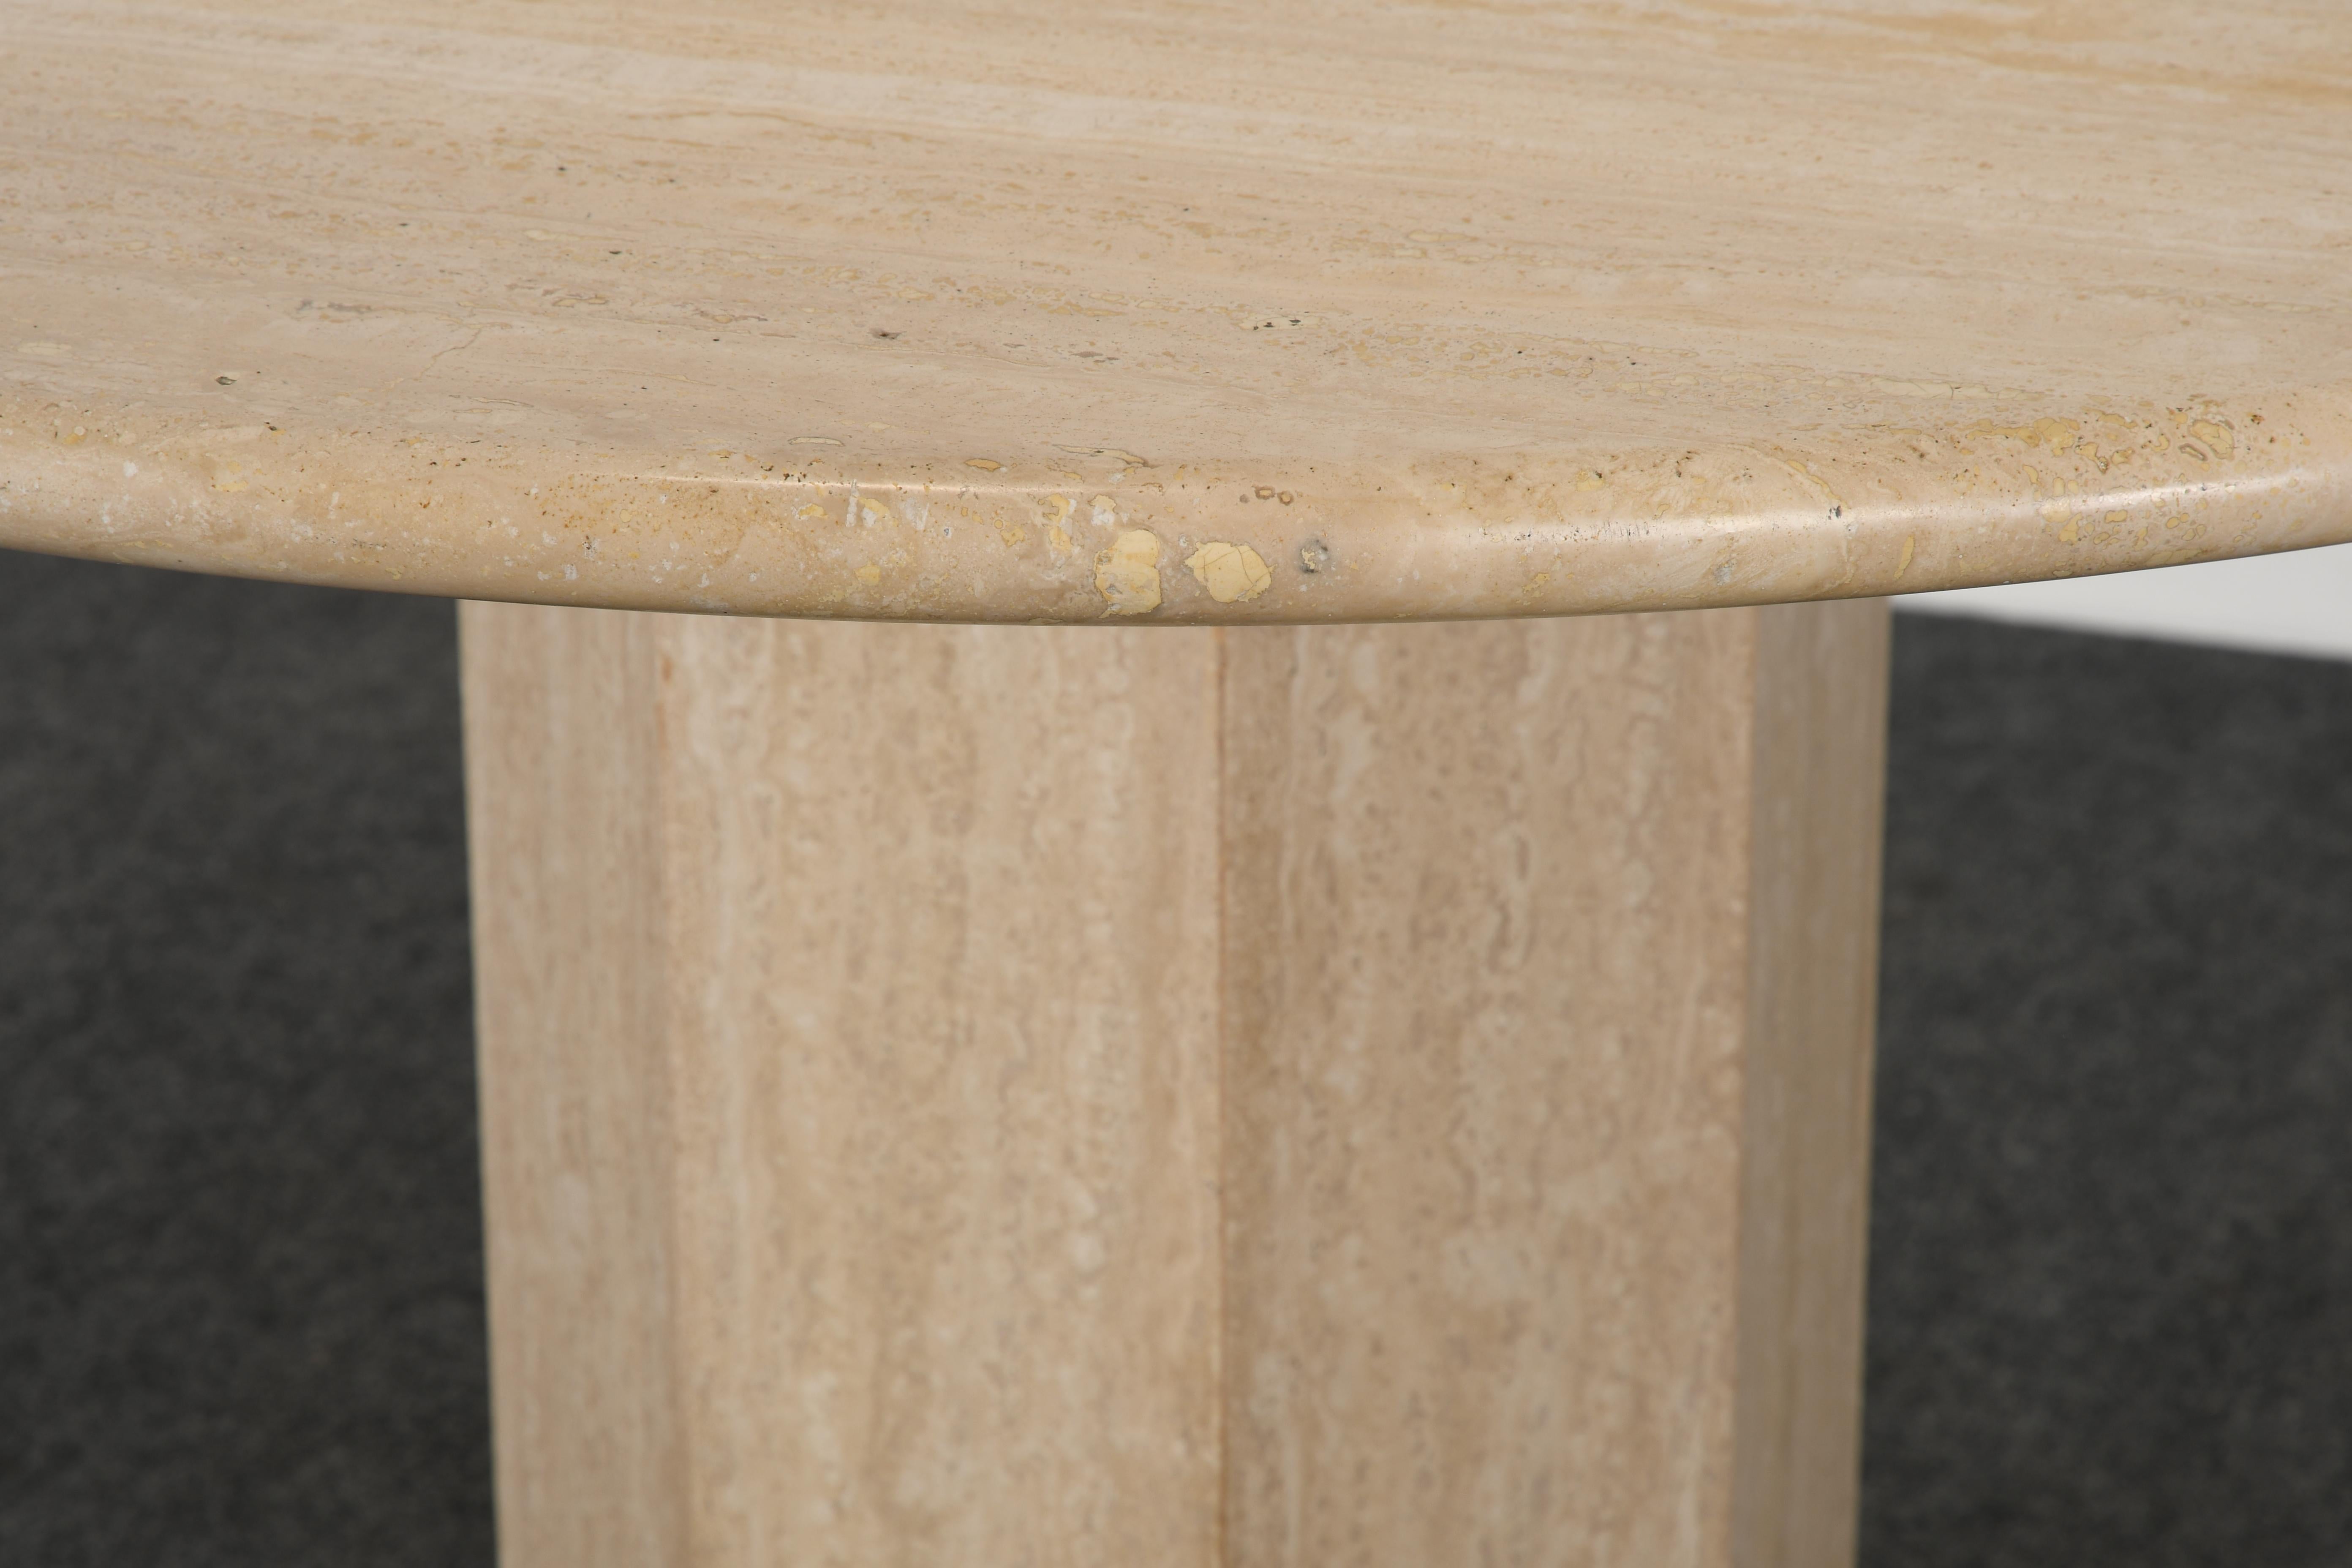 A modernist round travertine marble dining table with an octagonal base and bullnose edge. This is a beautiful example of stone with various variegated veins to surface.

The top has a low gloss finish and is etched in some areas throughout. This